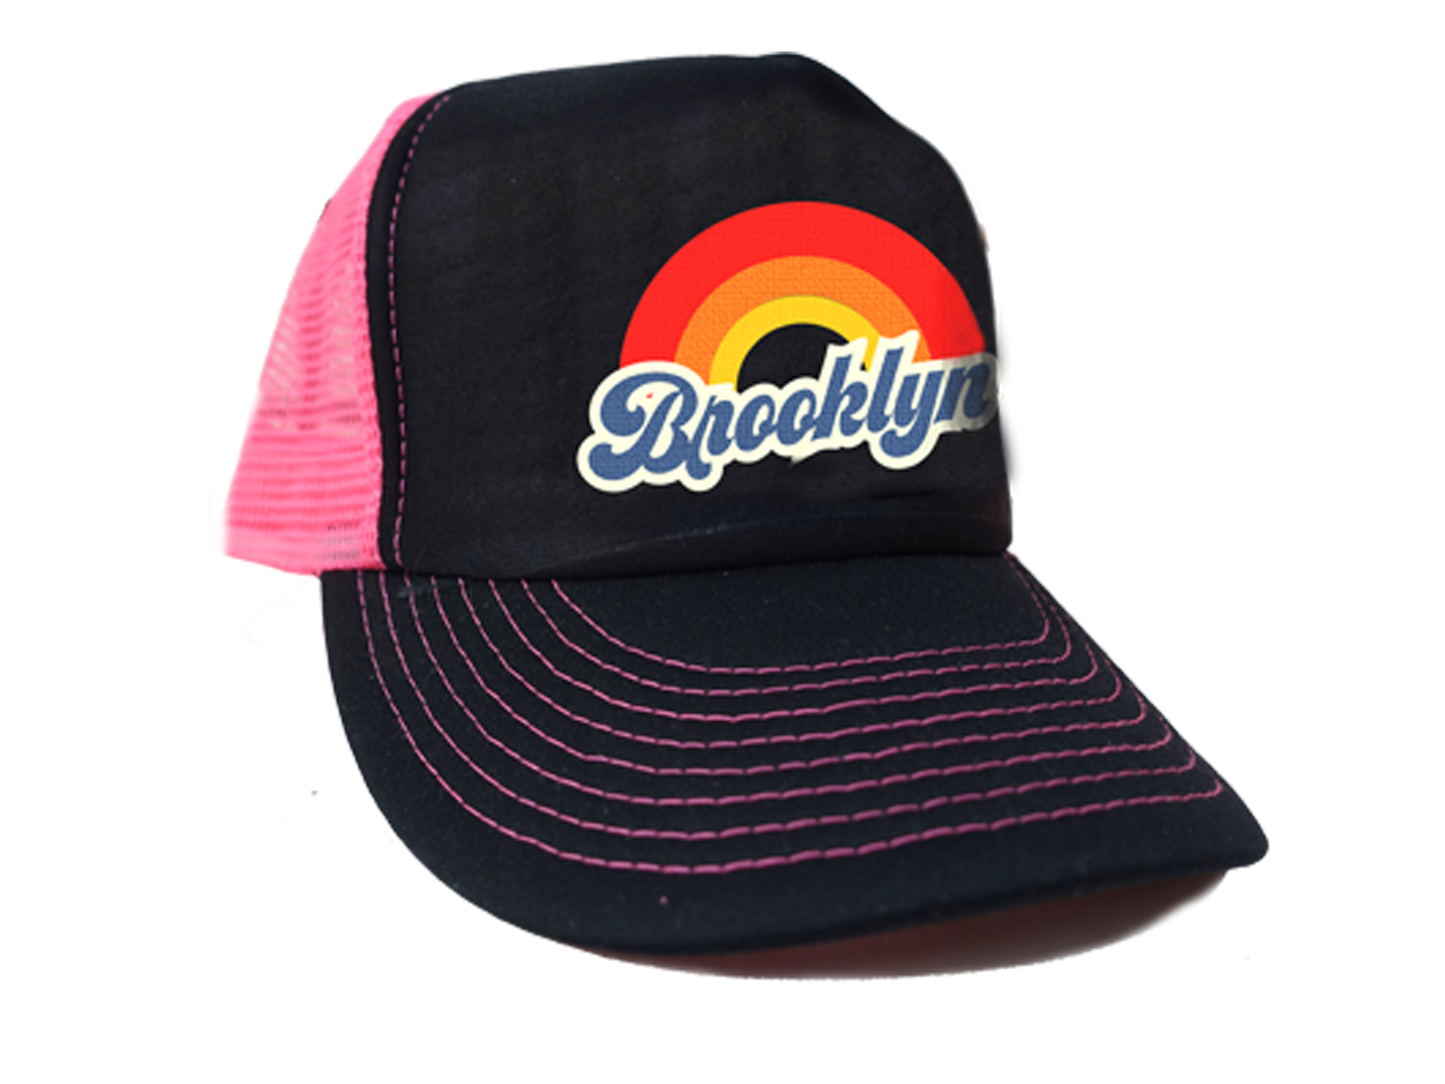 Brooklyn hat, retro rainbow Brooklyn design on a black background with hot pink mesh and embroidery on a women's baseball cap, hand-printed, handmade gifts made for everyone in Brooklyn NY 